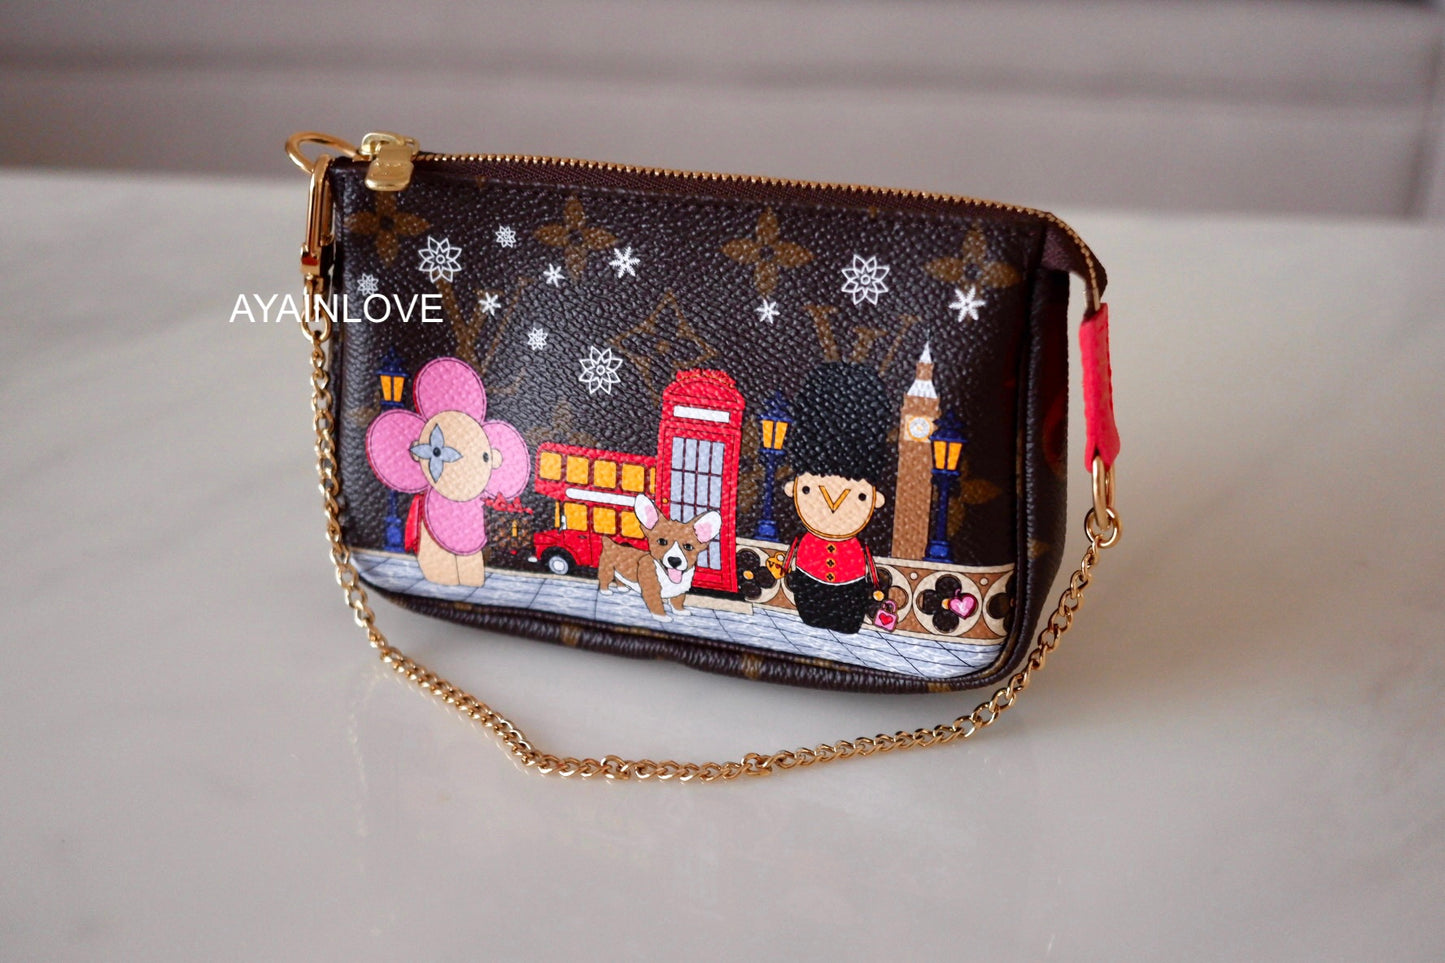 LOUIS VUITTON Mini Pochette Holiday Japan Limited Edition and